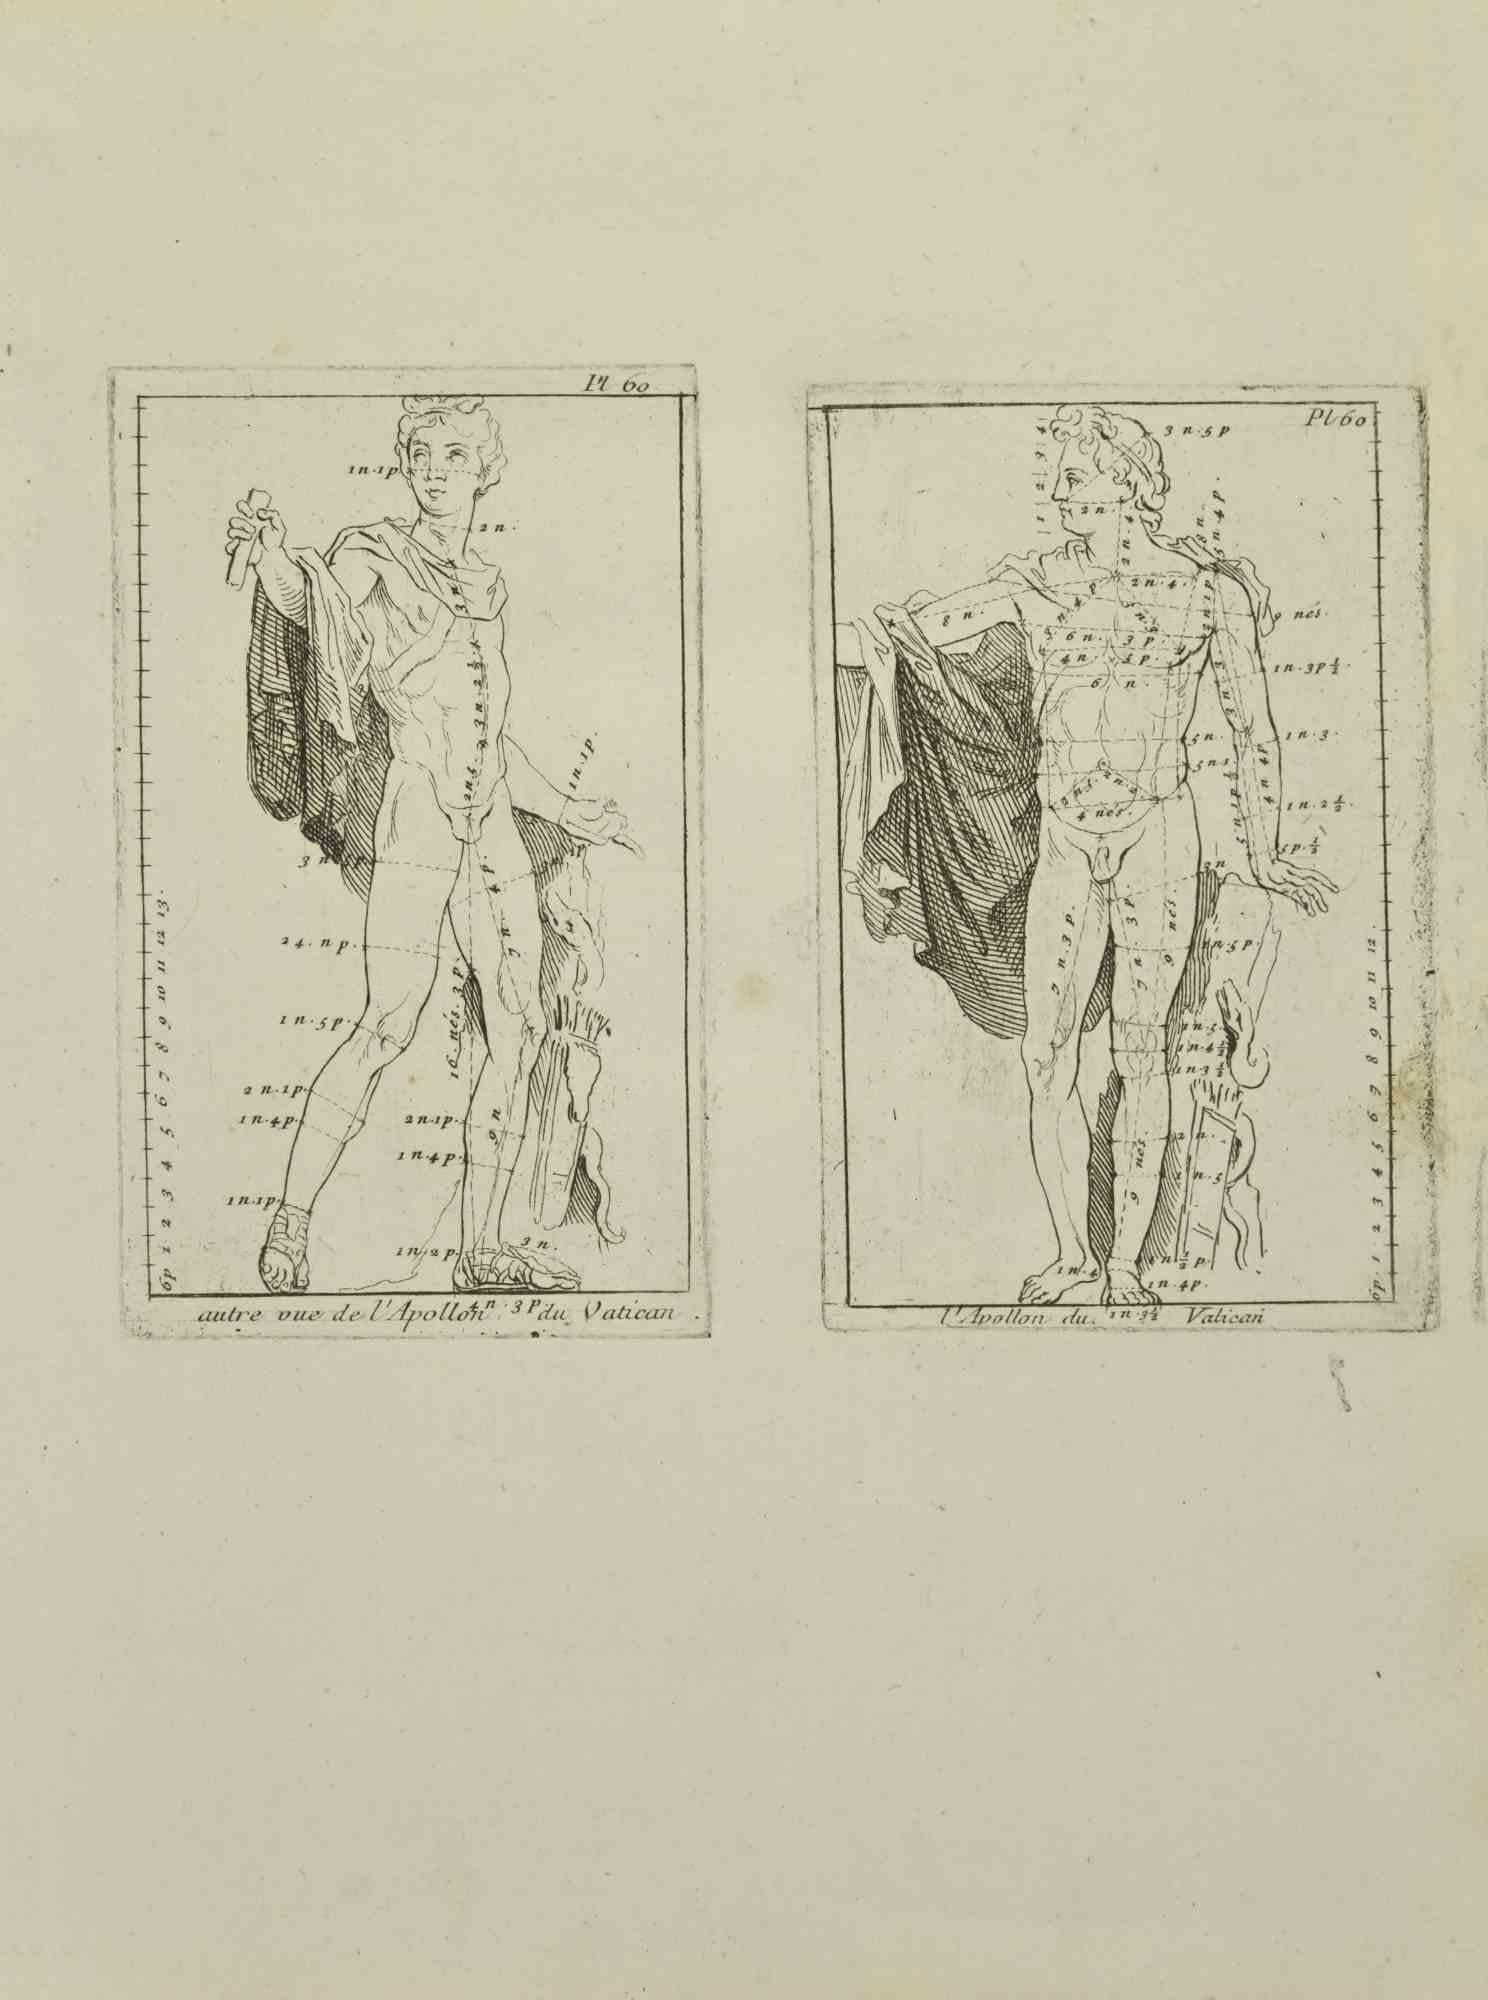 Apollon is an etching realized by Jean François Poletnich in 18th Century.

Good conditions.

The artwork is depicted through confident strokes.